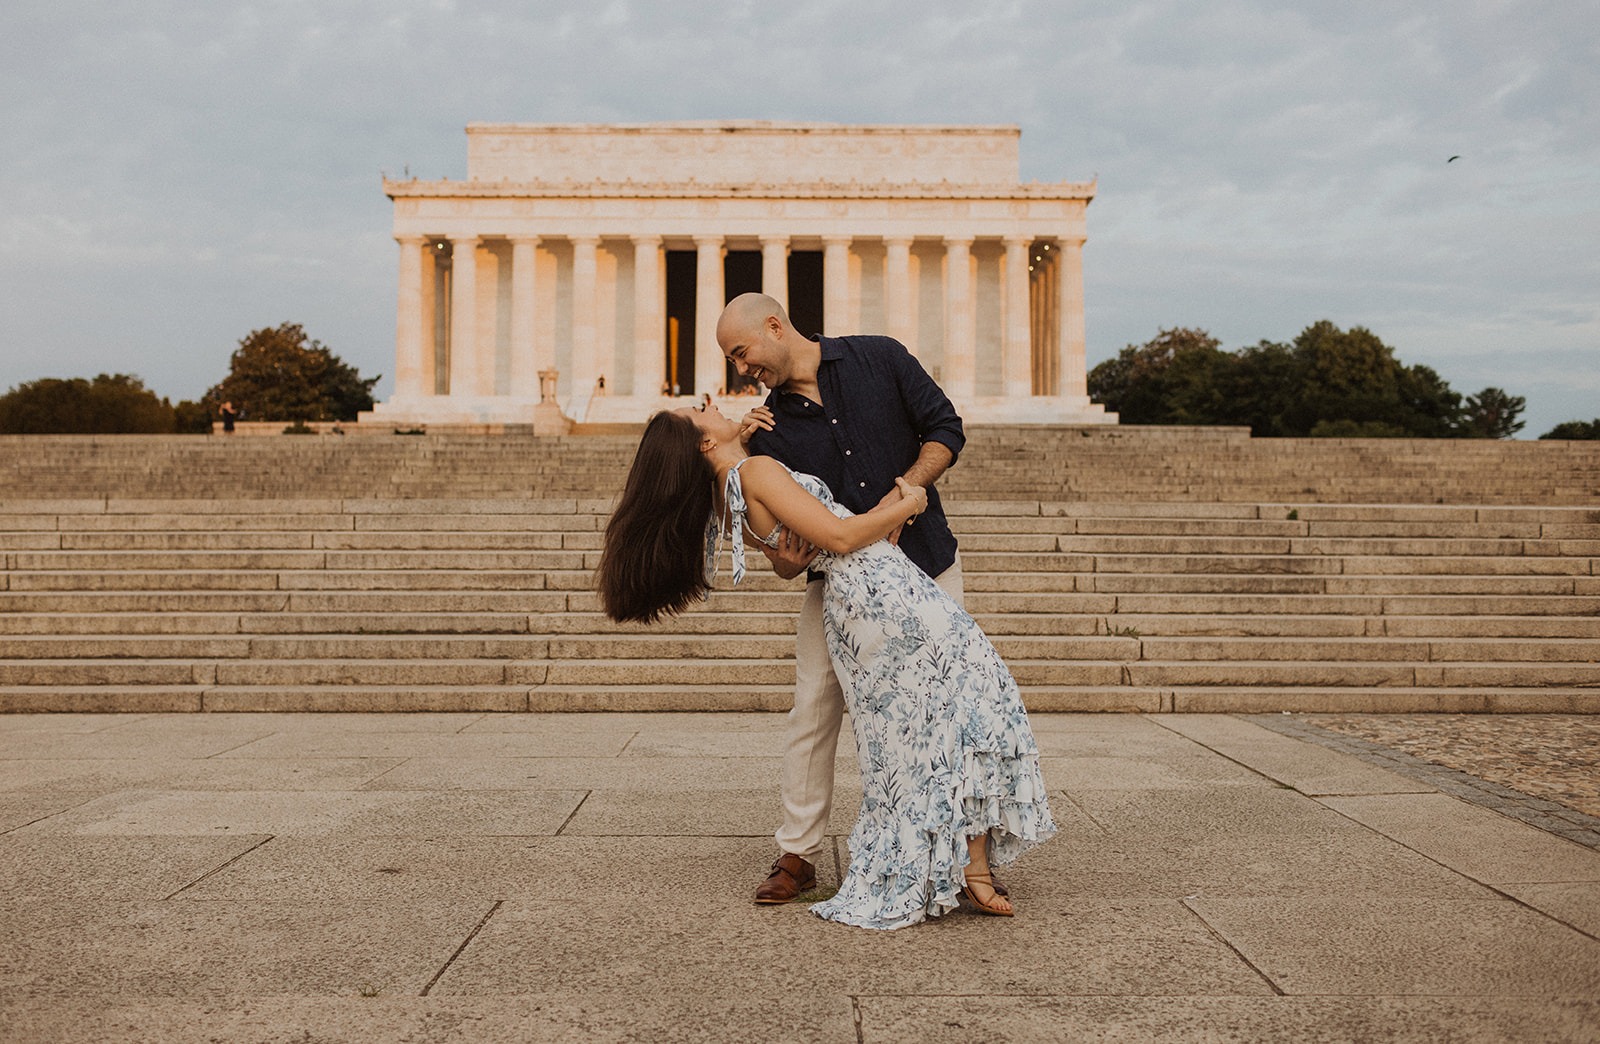 Man dips woman in front of Lincoln Memorial at sunrise